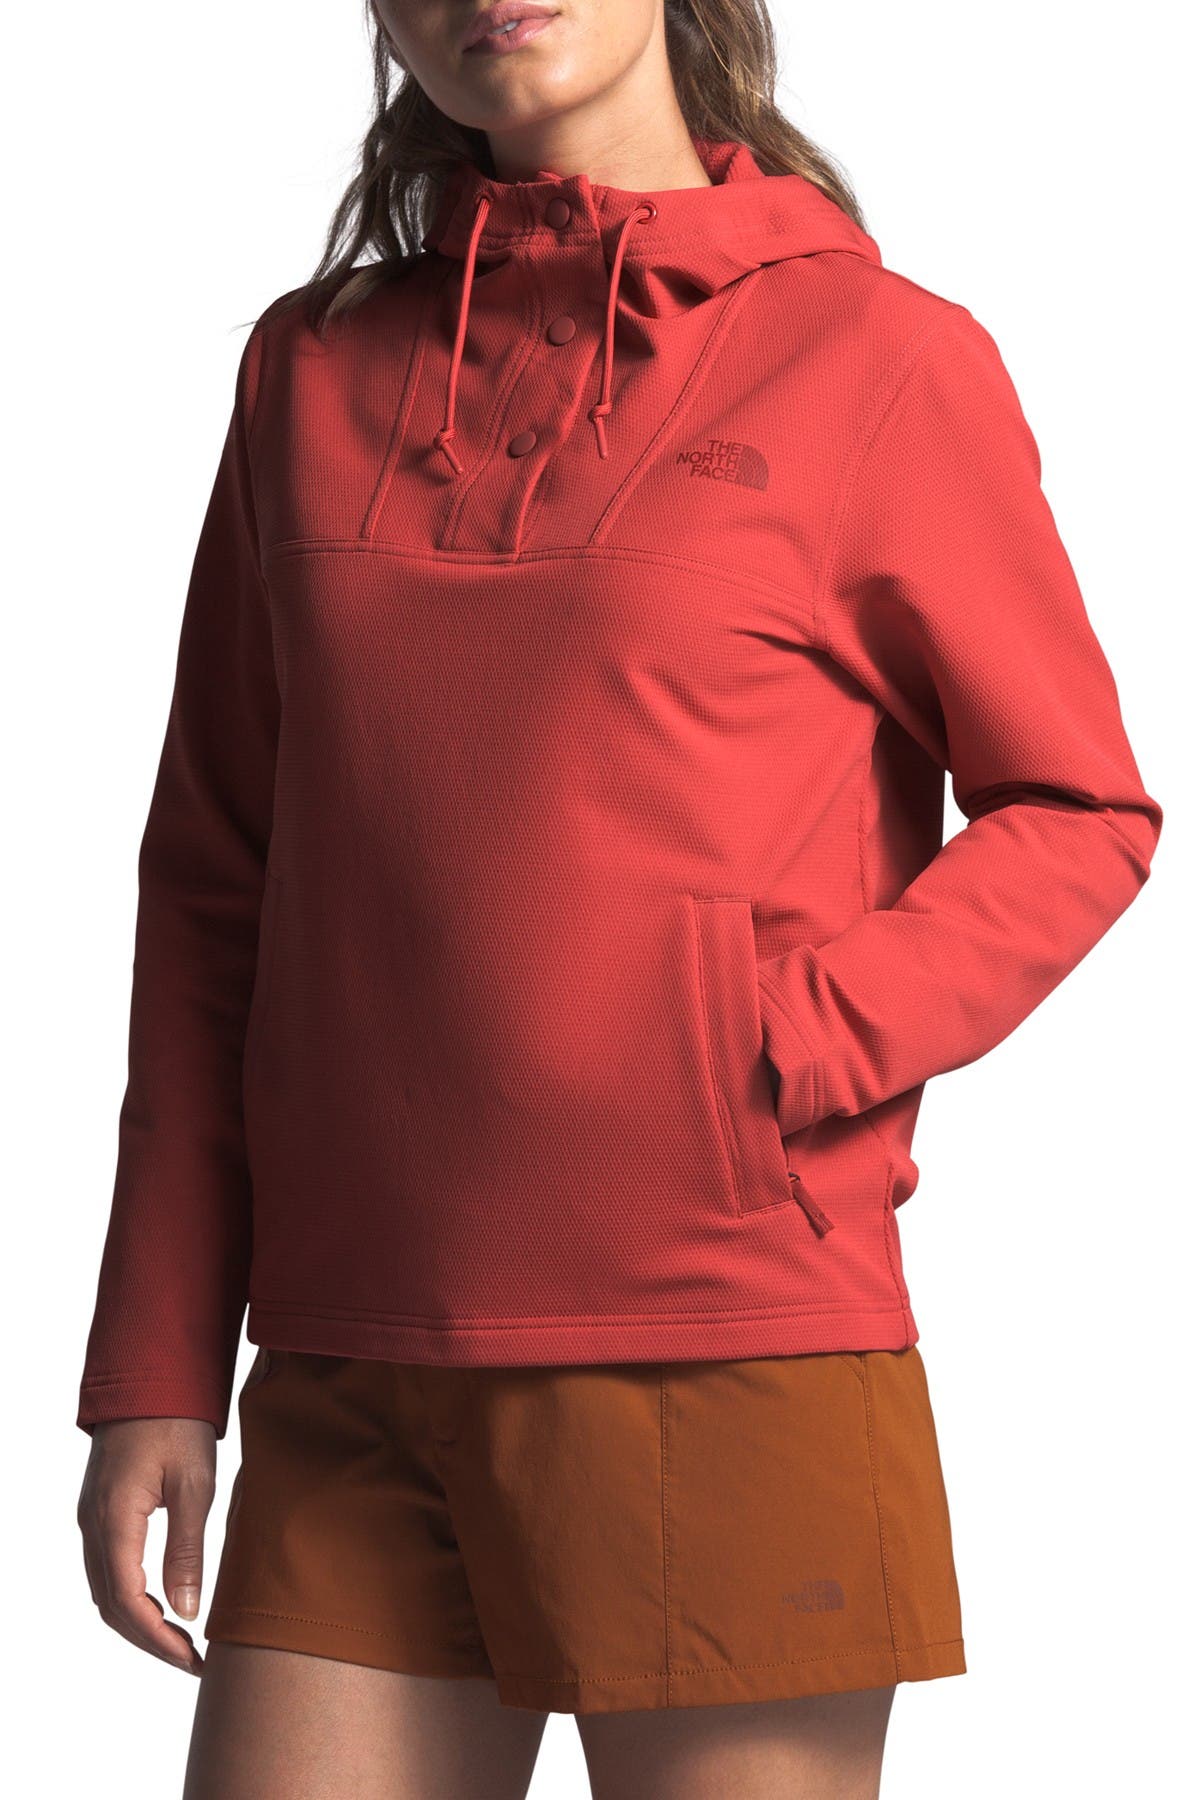 the north face women's tekno ridge pullover hoodie